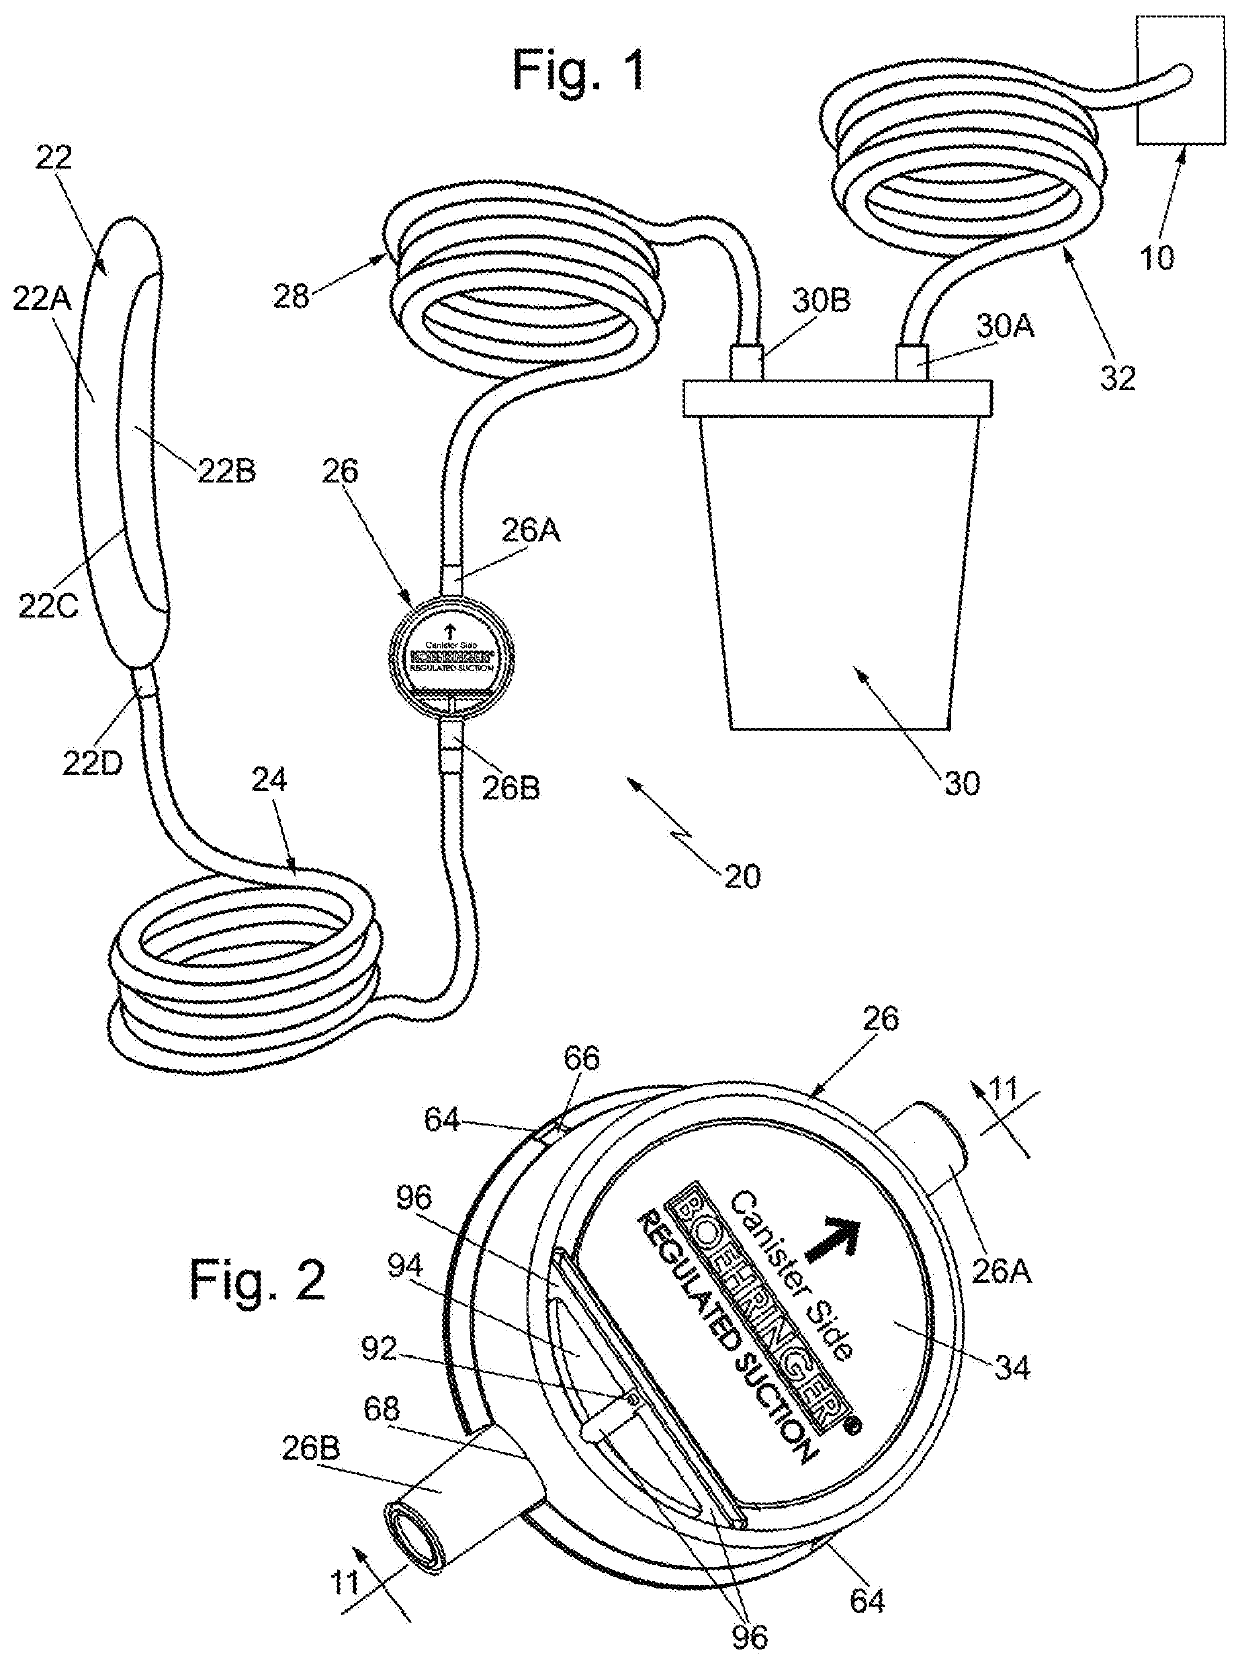 Method for automatically removing urine from a female patient